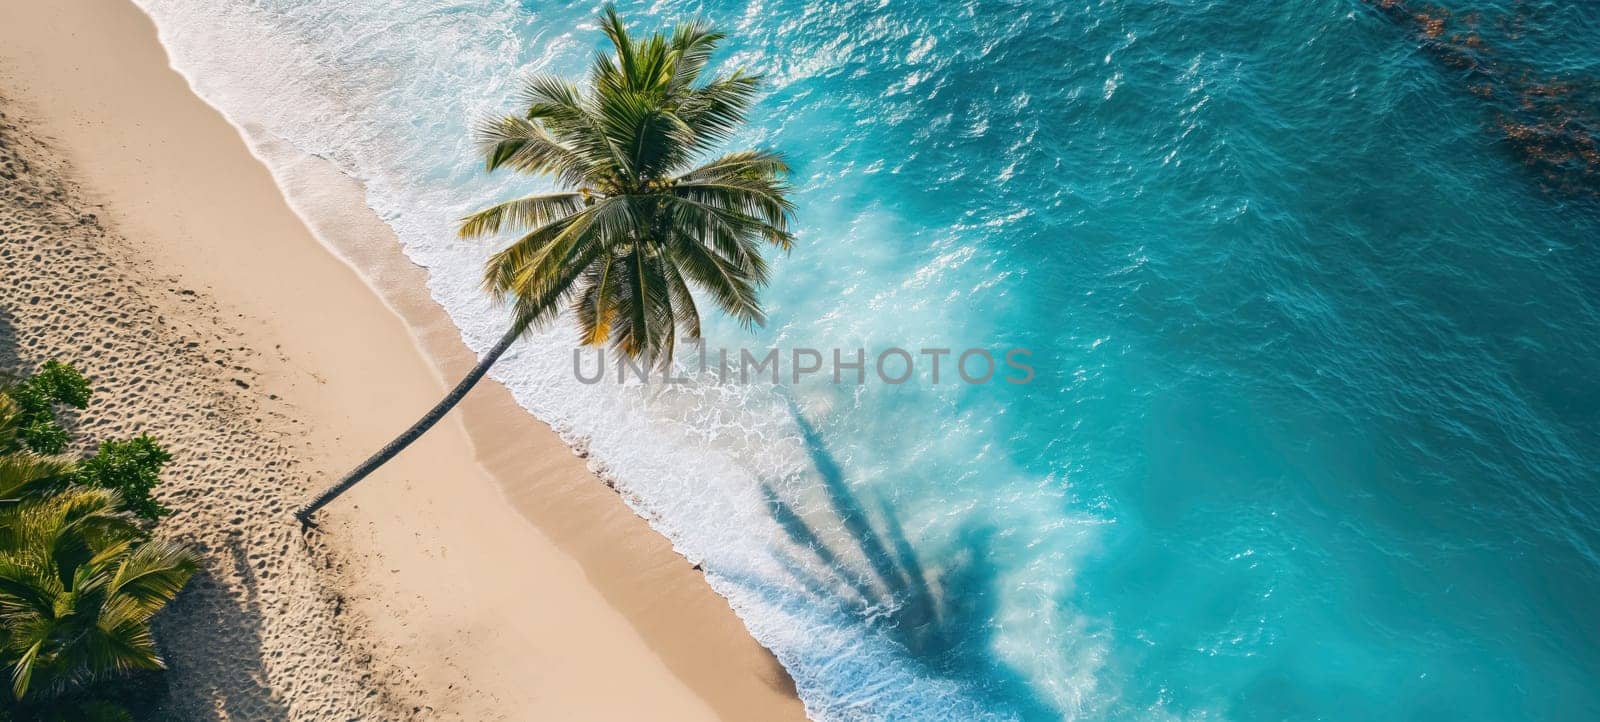 Aerial shot of a solitary palm tree on a pristine sandy beach with the turquoise ocean waves washing ashore.